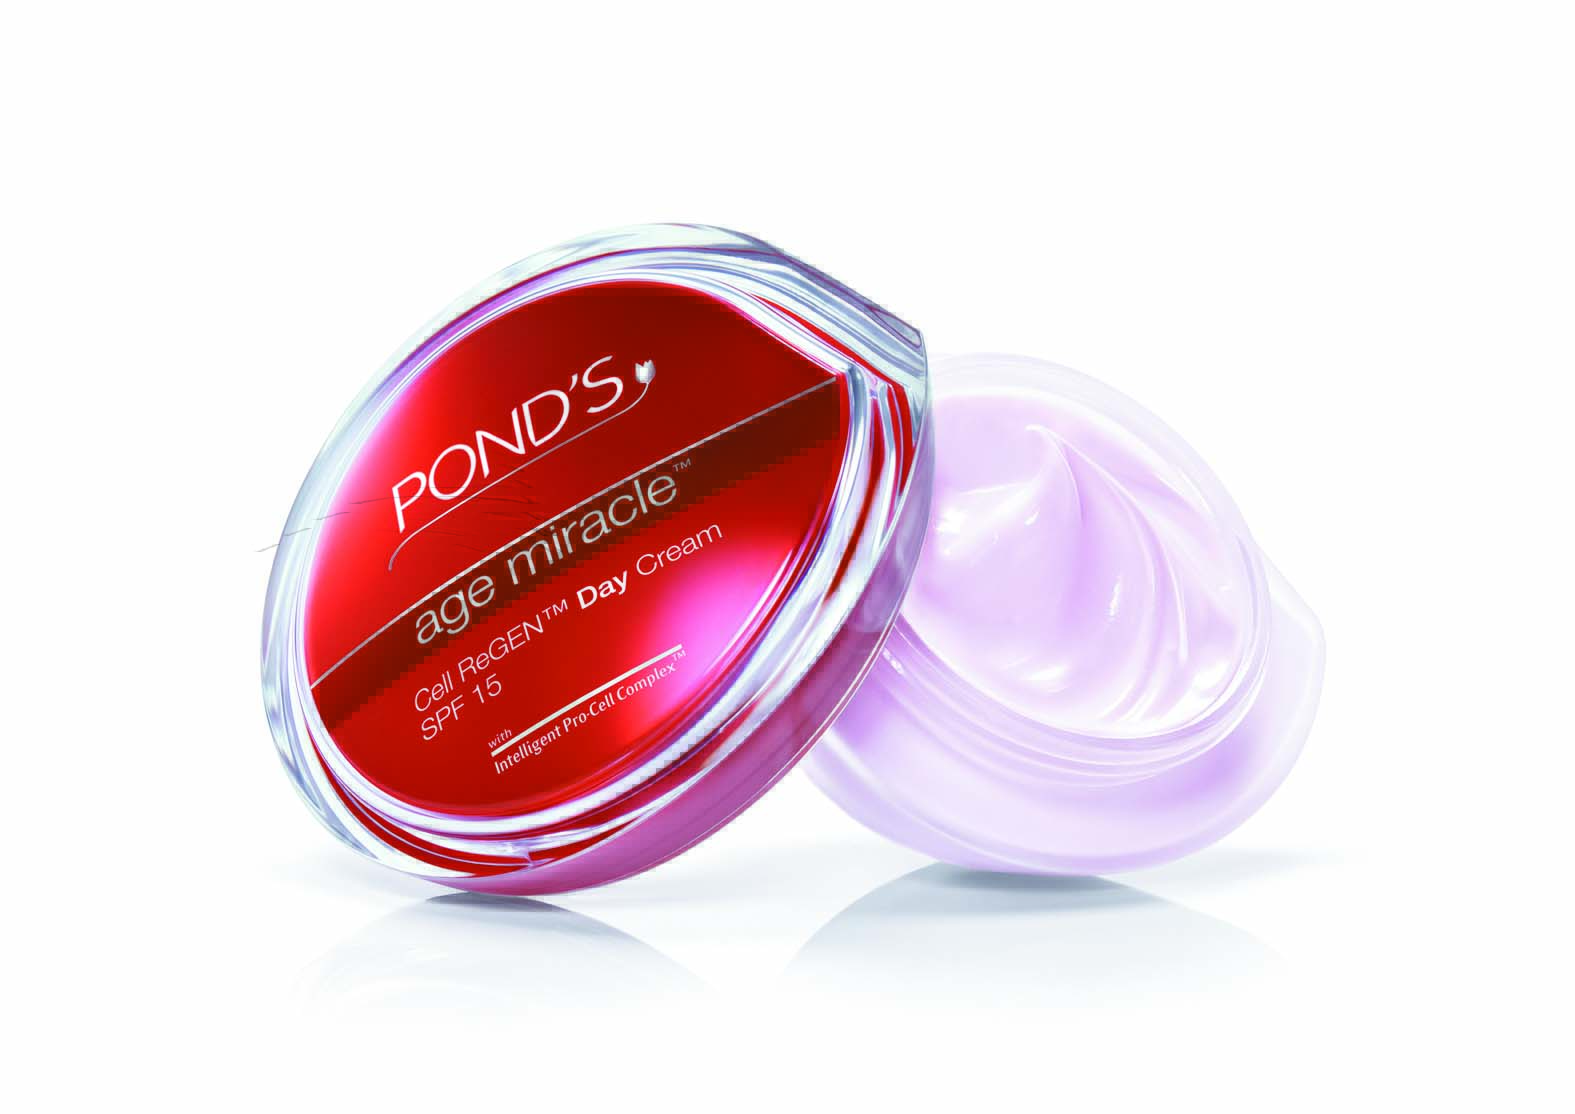 Pond's Age Miracle Cell ReGEN Day Cream SPF 15 PA++, $29